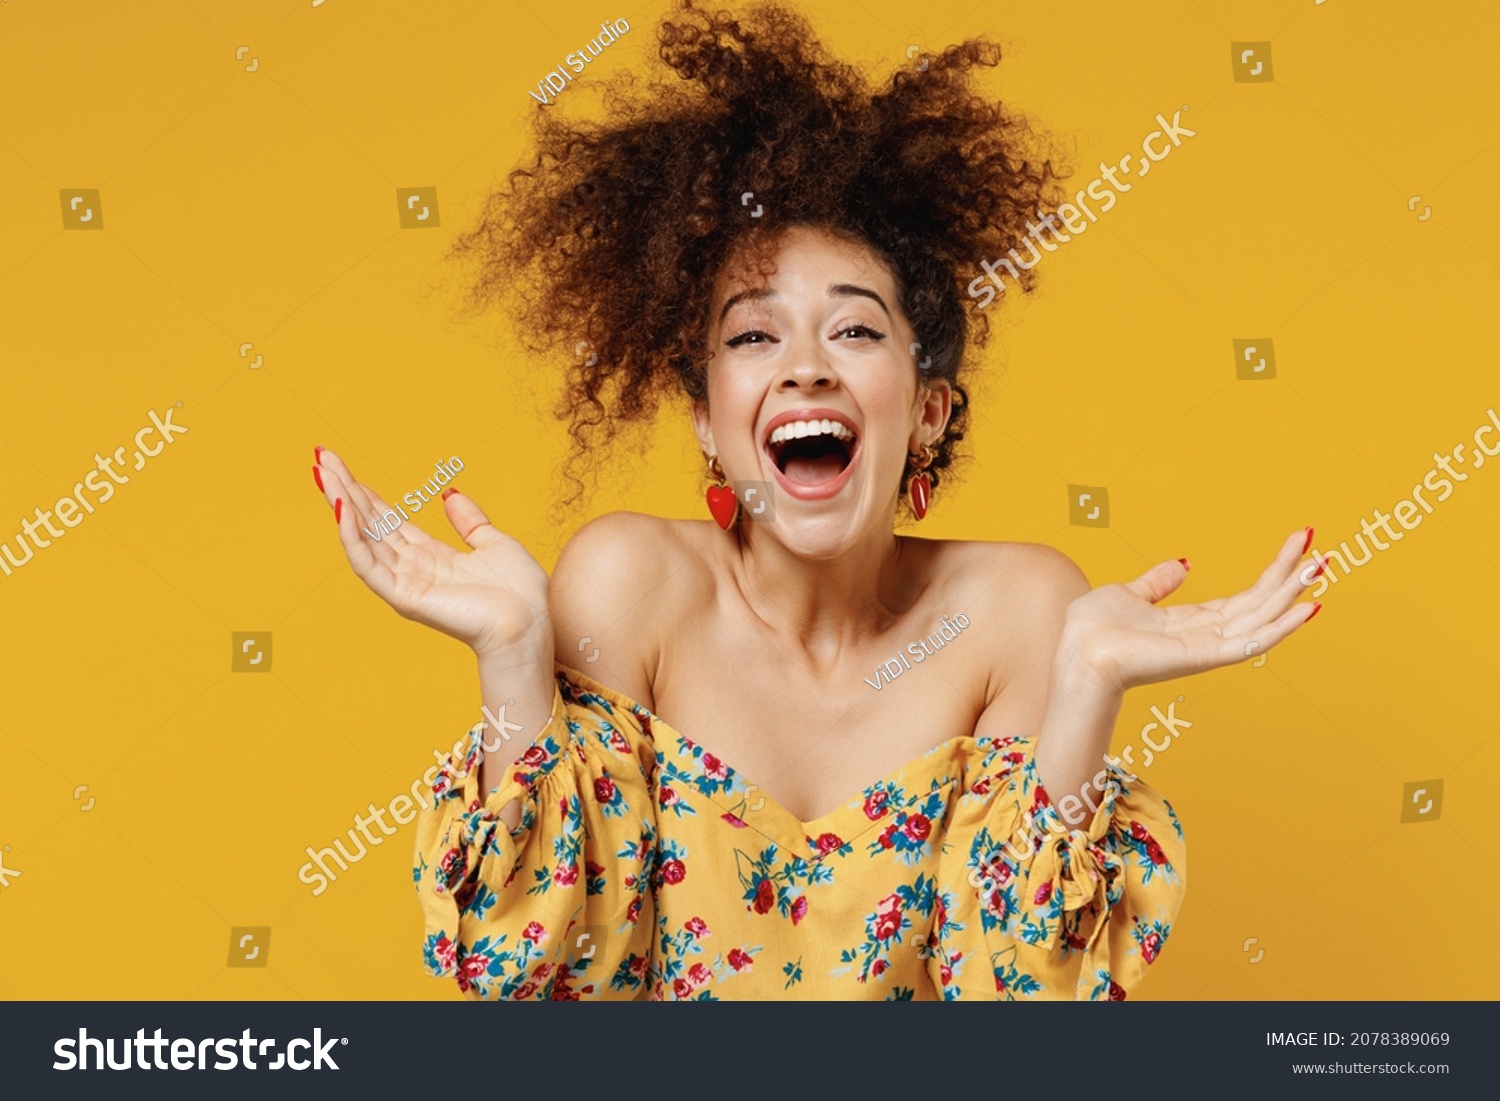 Young happy satisfied excited fun surprised amazed woman 20s with culry hair in casual clothes spread hands look camera isolated on plain yellow background studio portrait. People lifestyle concept #2078389069